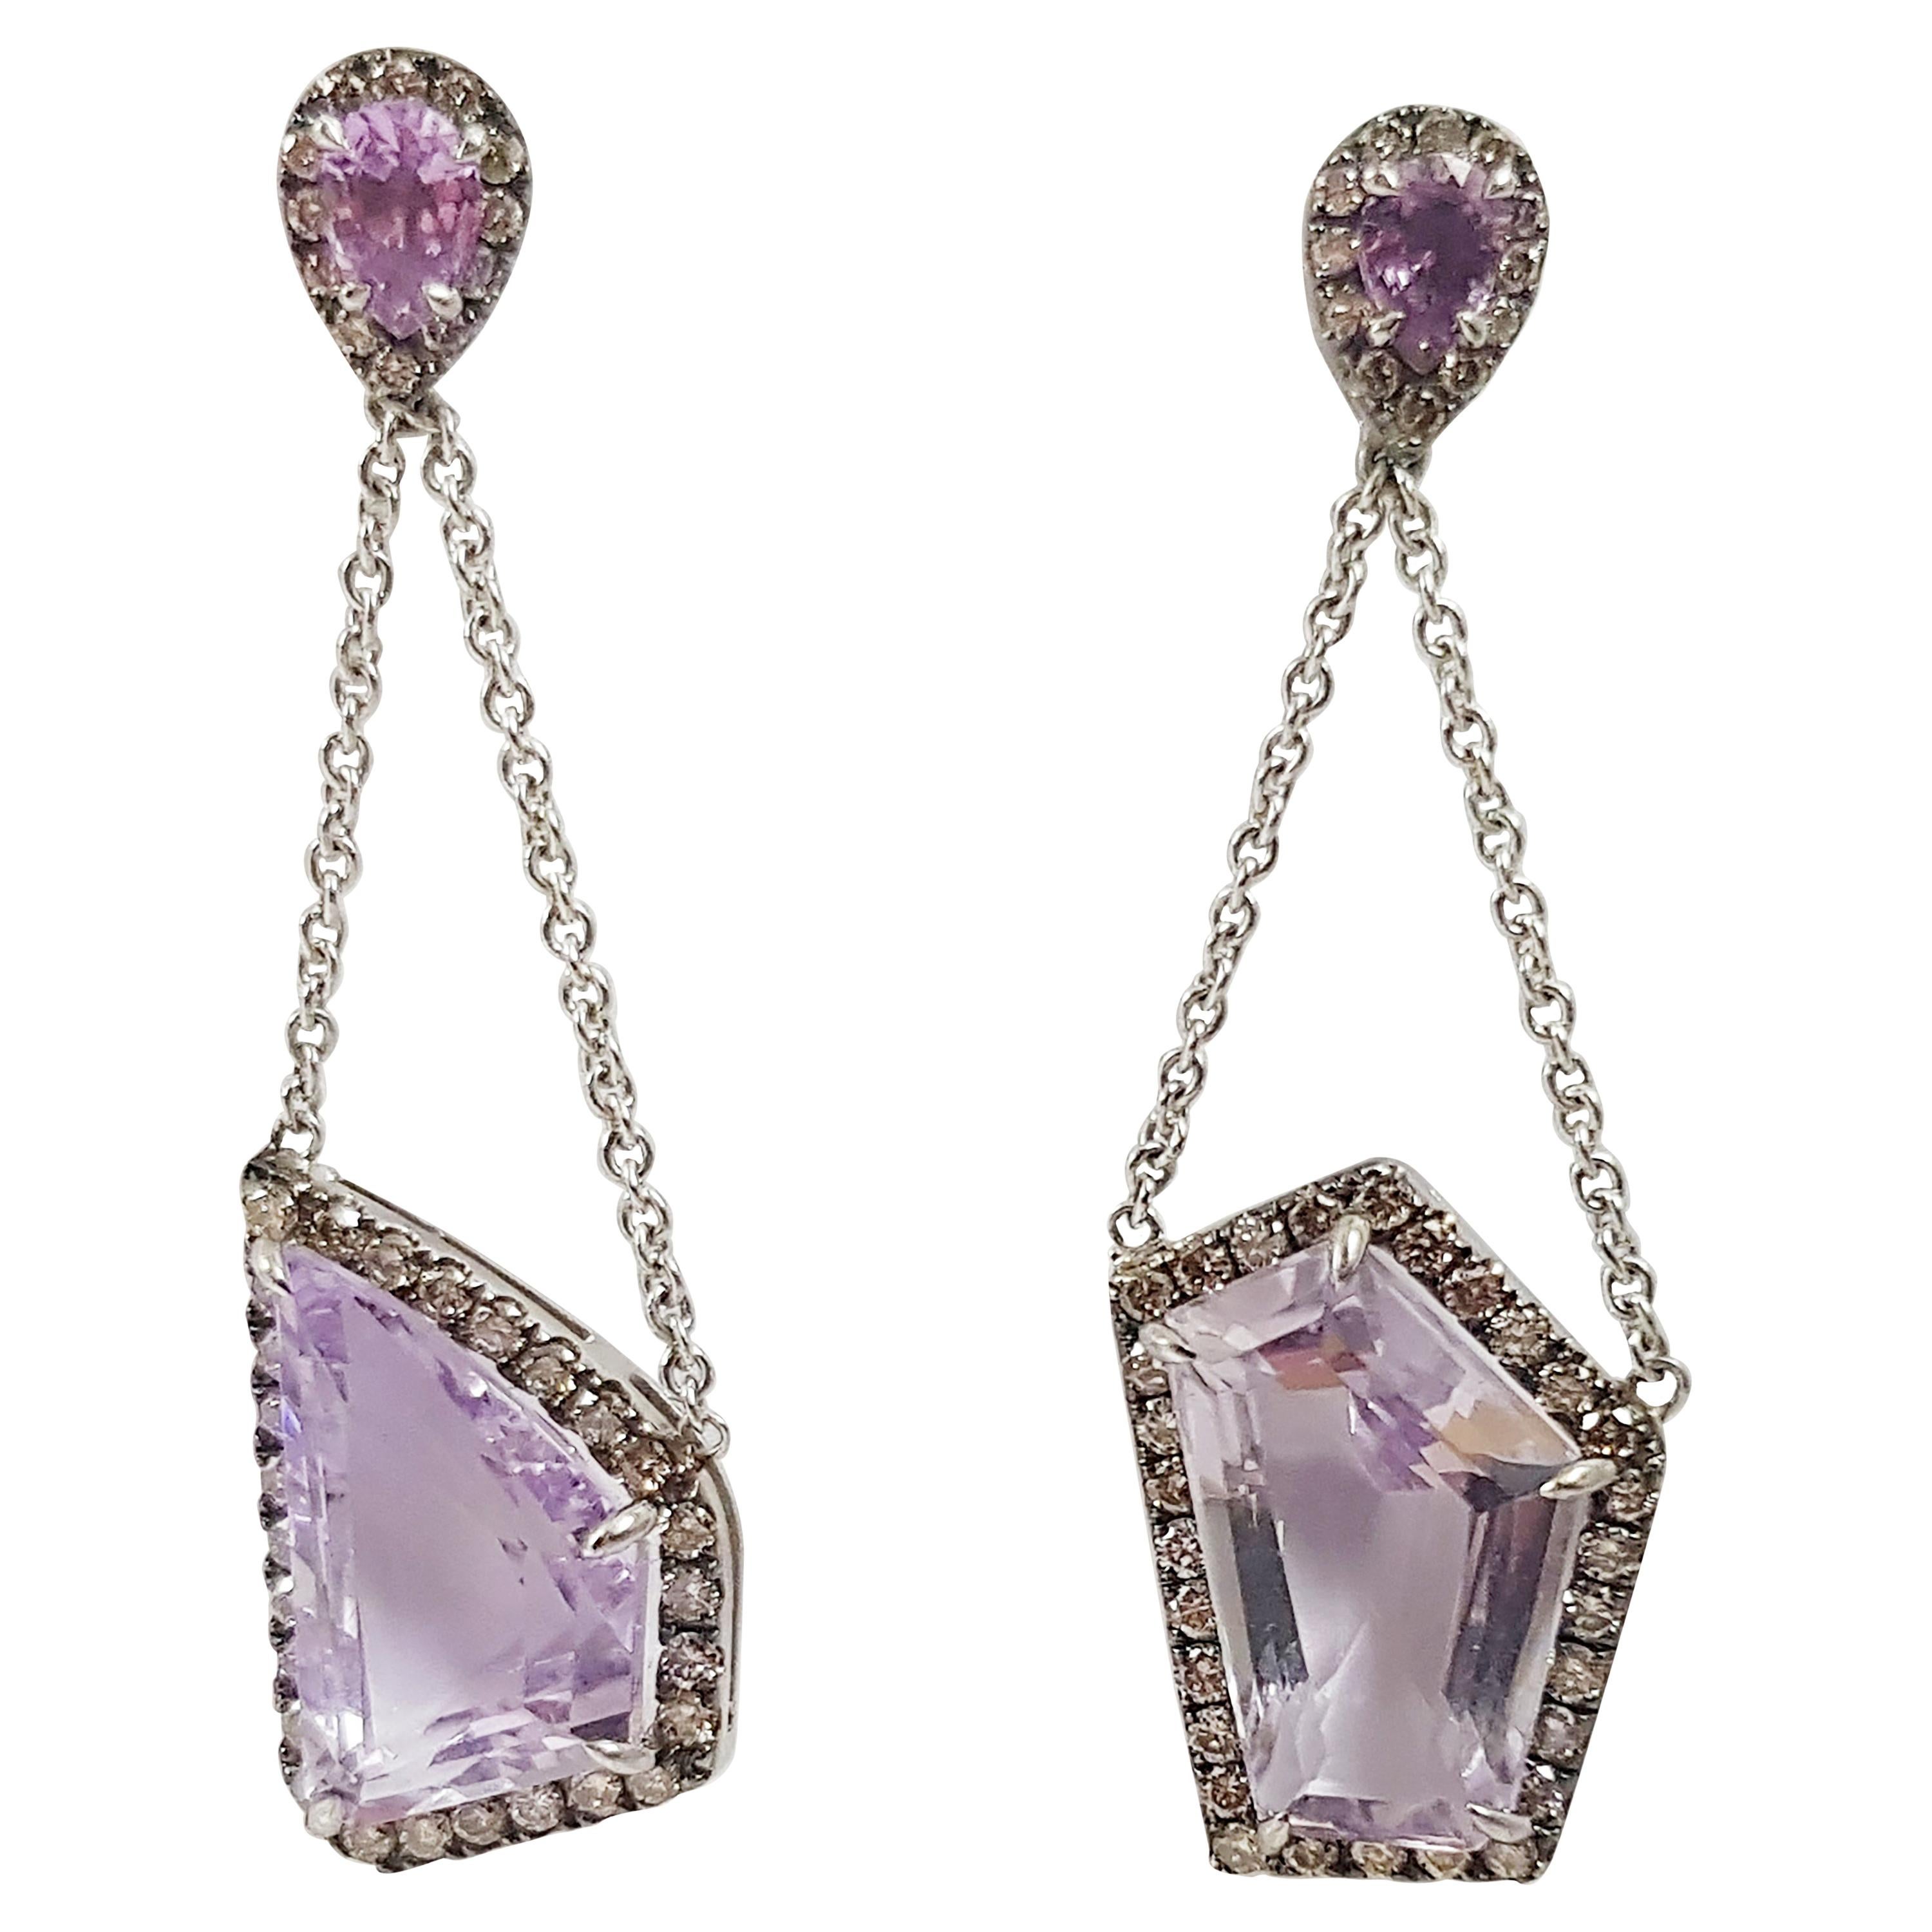 Mismatched Pink Amethyst, Pink Sapphire, Brown Diamond Earrings in 18K White Gold